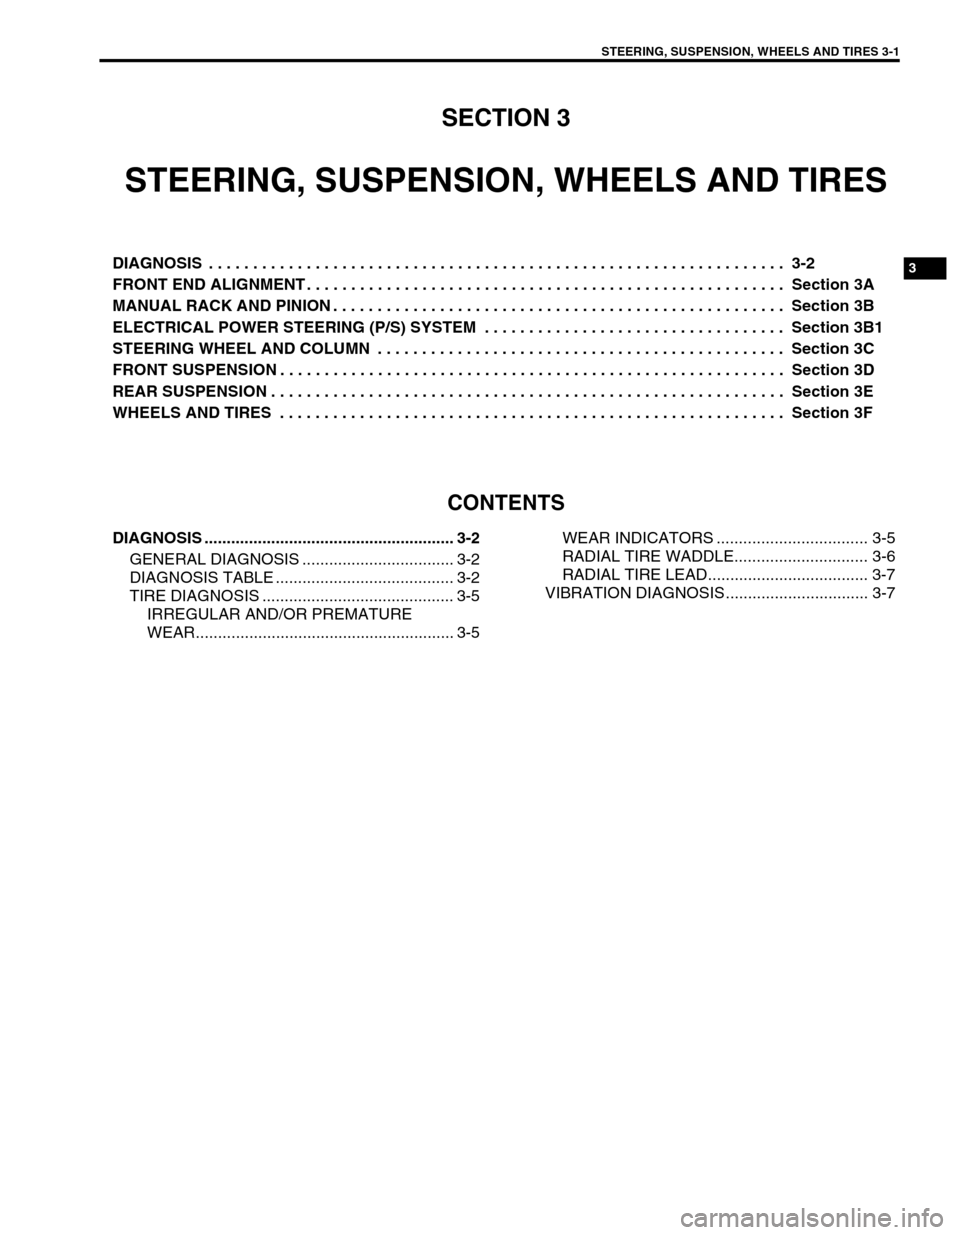 SUZUKI SWIFT 2000 1.G RG413 Service User Guide STEERING, SUSPENSION, WHEELS AND TIRES 3-1
6F1
6F2
6G
6H
6K
3
7A1
7B1
7C1
7D
7E
7F
8A
8B
8C
8D
8E
9
10
10A
10B
SECTION 3
STEERING, SUSPENSION, WHEELS AND TIRES
DIAGNOSIS  . . . . . . . . . . . . . . .